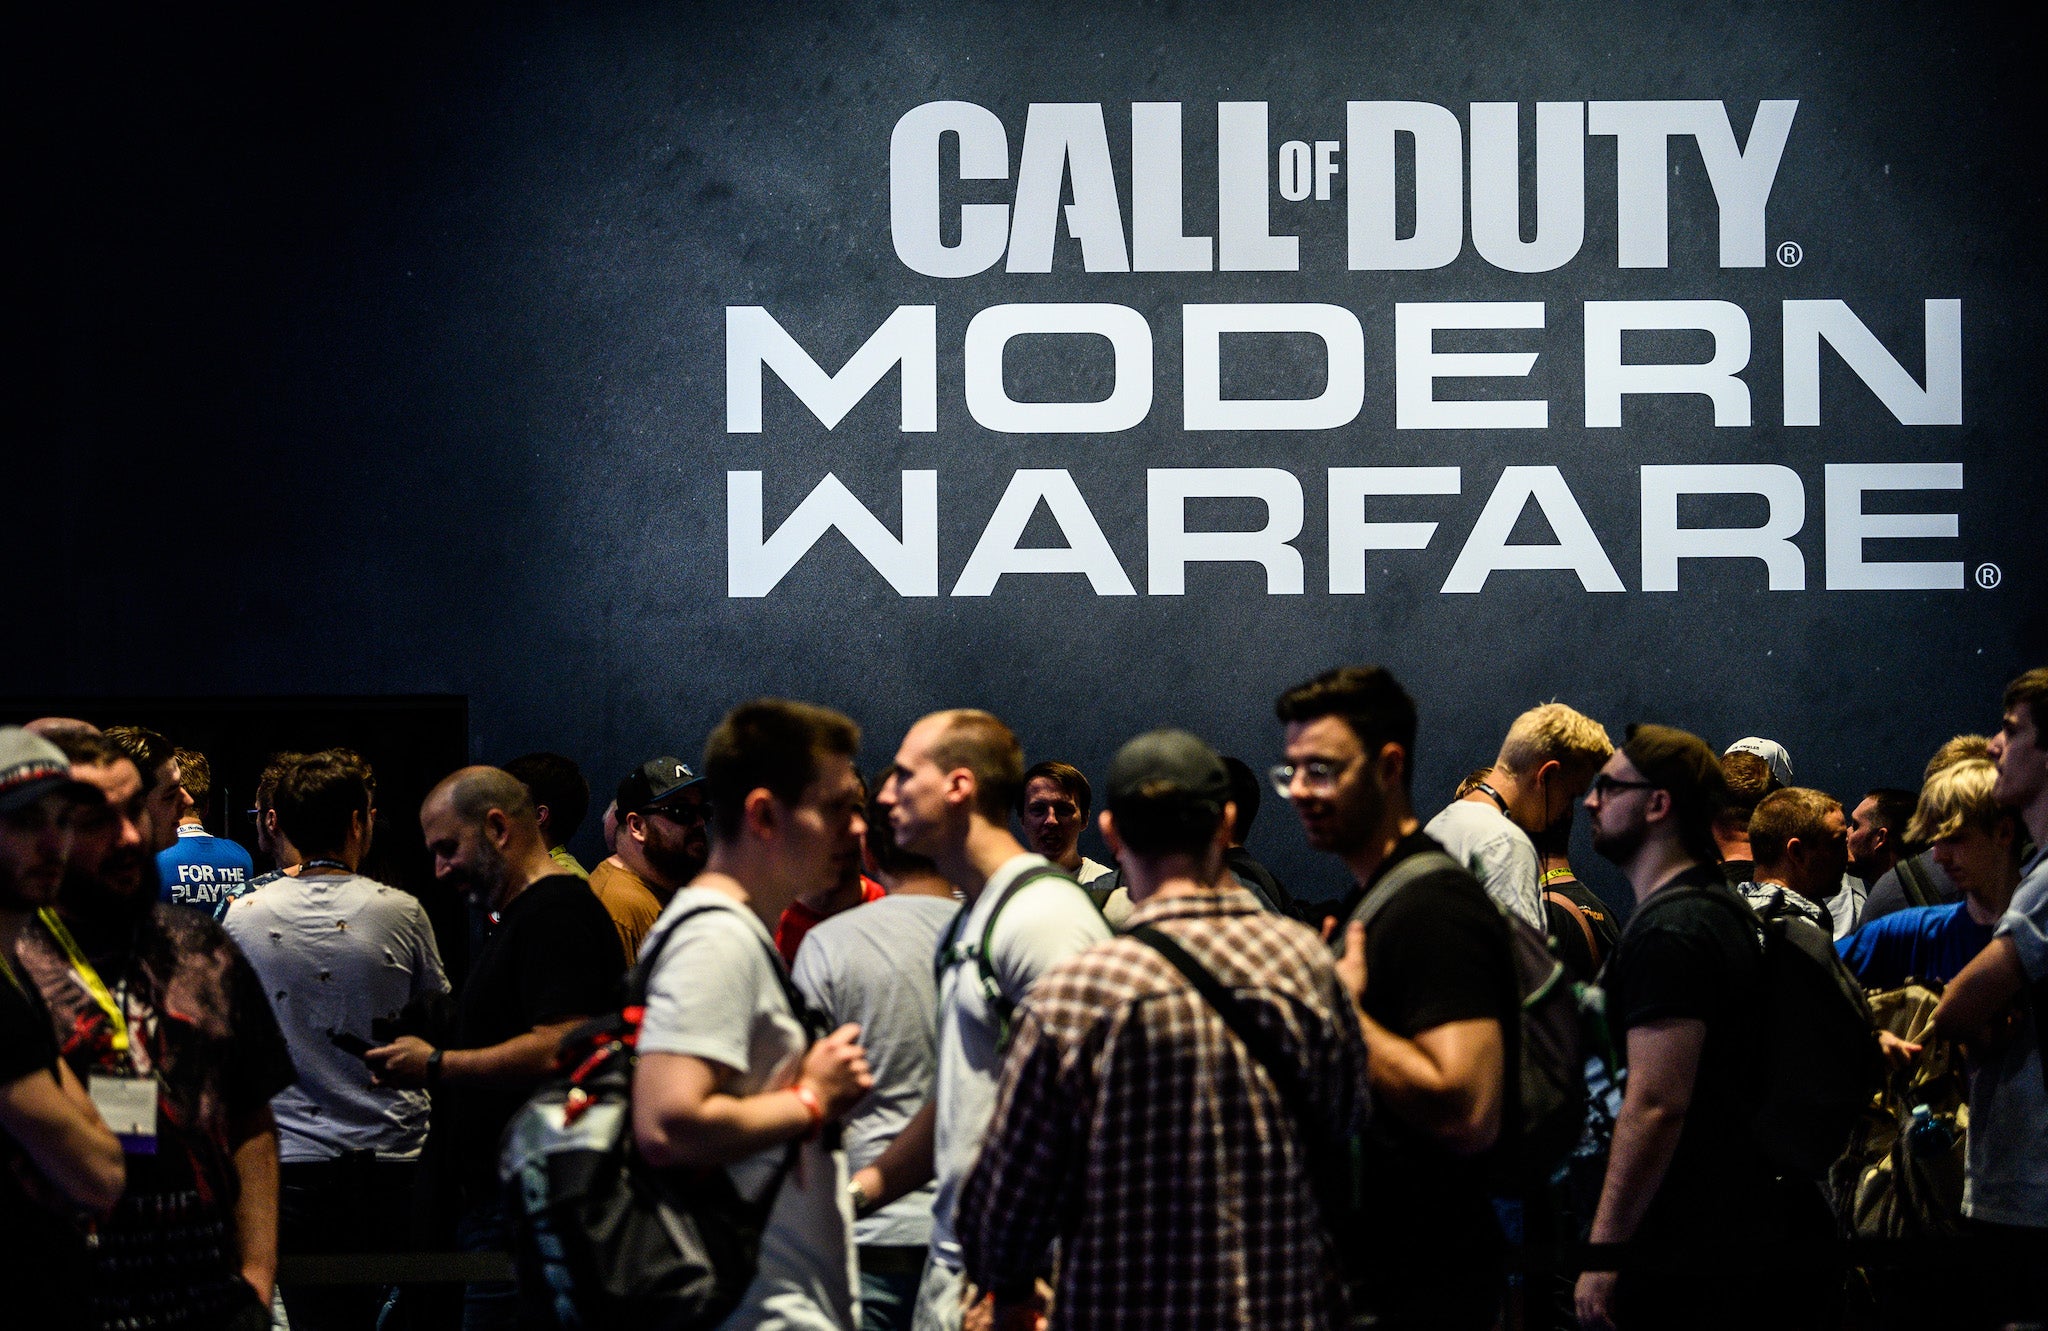 Visitors wait to try out the latest version of Call of Duty Modern Warfare during the press day at the 2019 Gamescom gaming trade fair on August 20, 2019 in Cologne, Germany